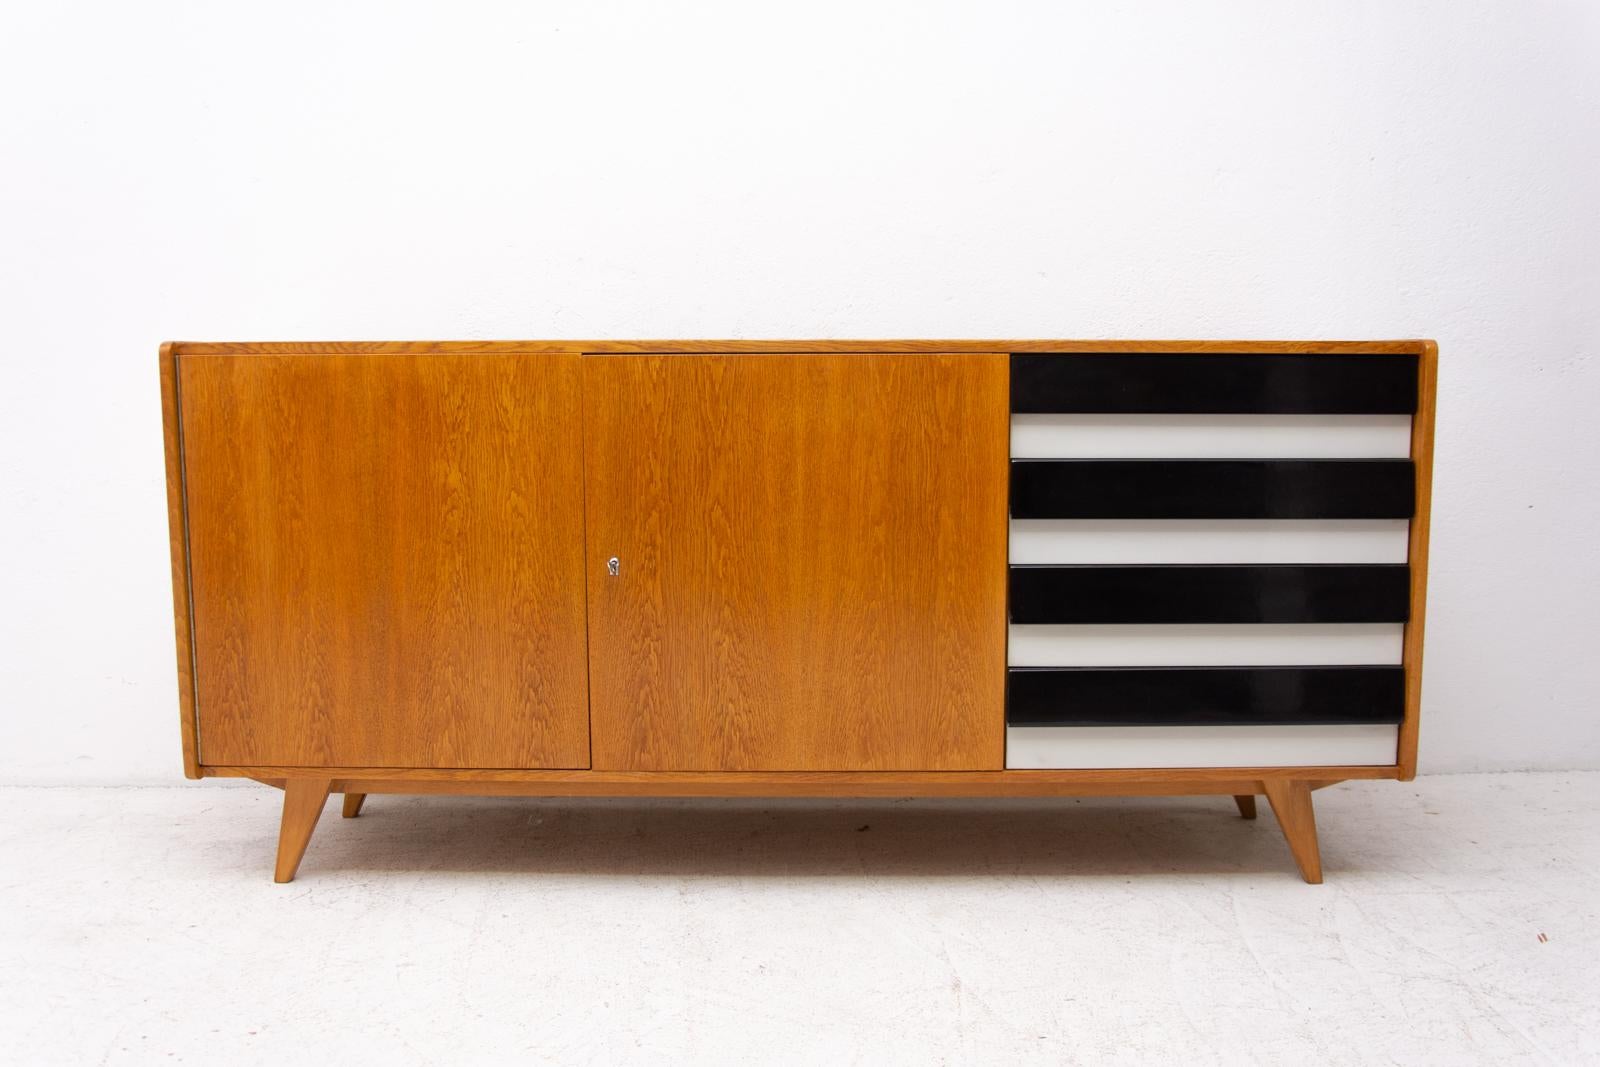 This Mid-Century Modernist sideboard no. U-460 was designed by the famous Czechoslovaka architect Jirí Jiroutek in 1958.
It was made in the former Czechoslovakia for Interiér Praha in the 1960s.
This model is associated with the world-famous EXPO